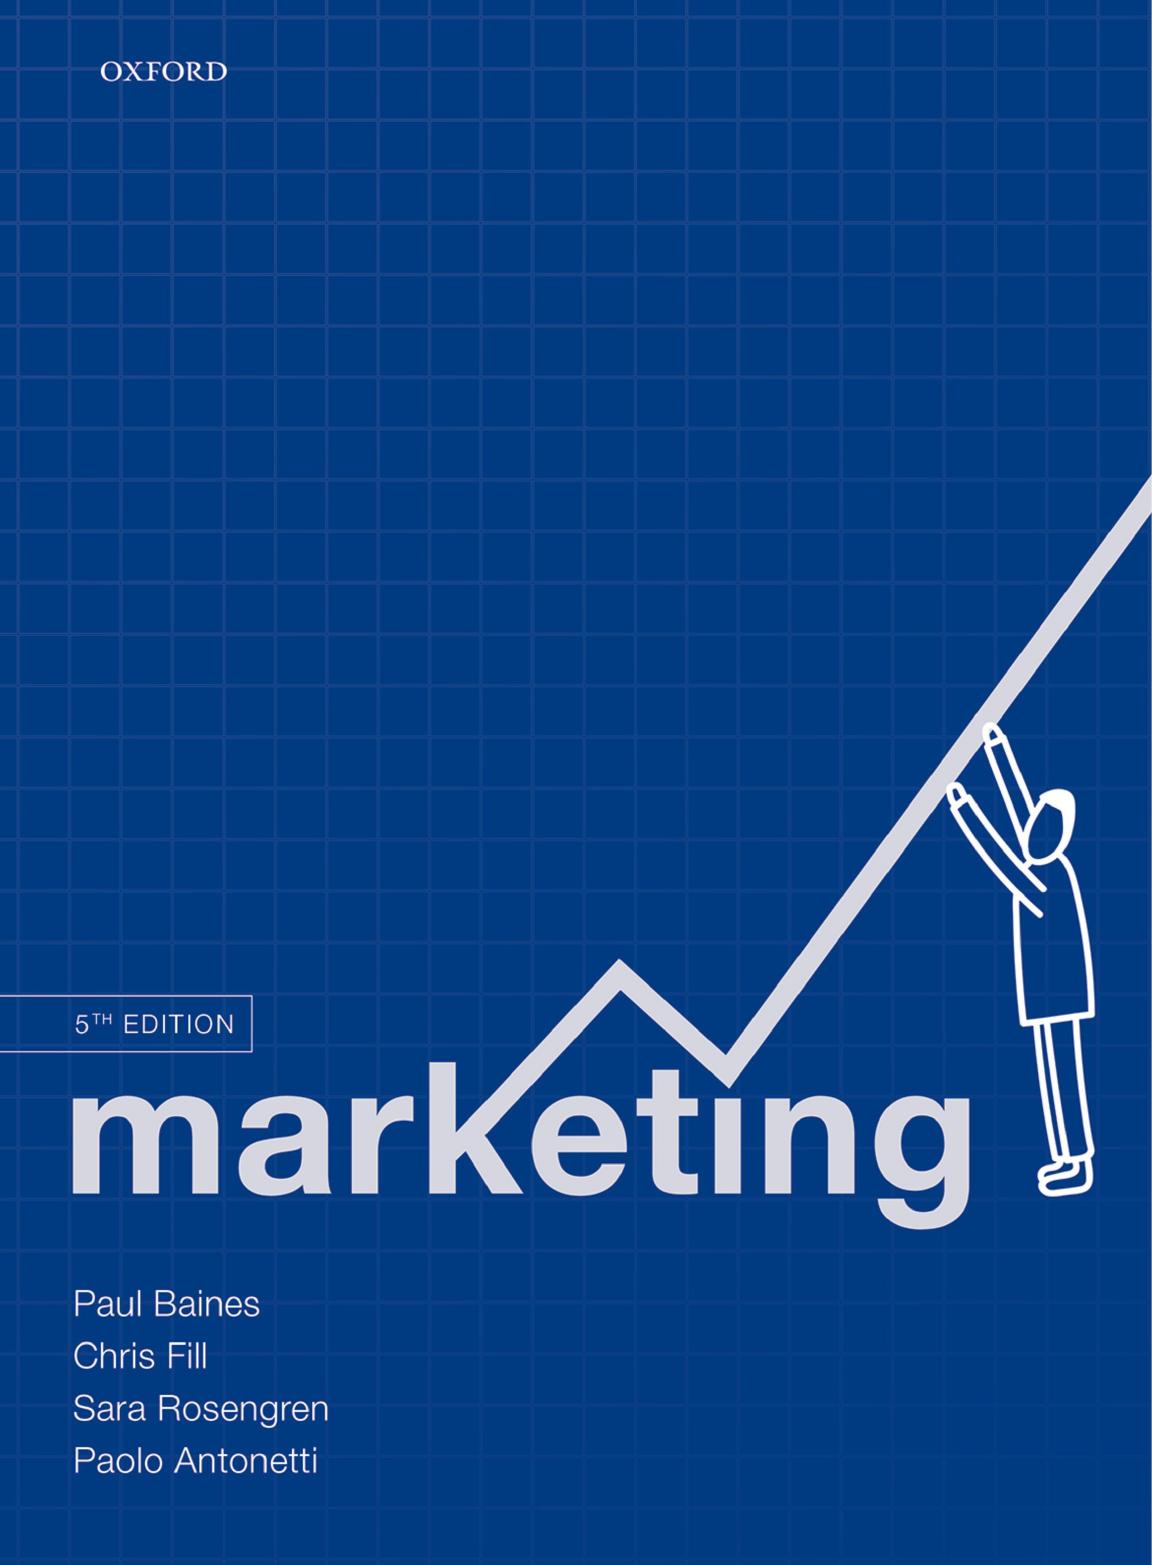 Marketing 5th Edition by Paul Baines